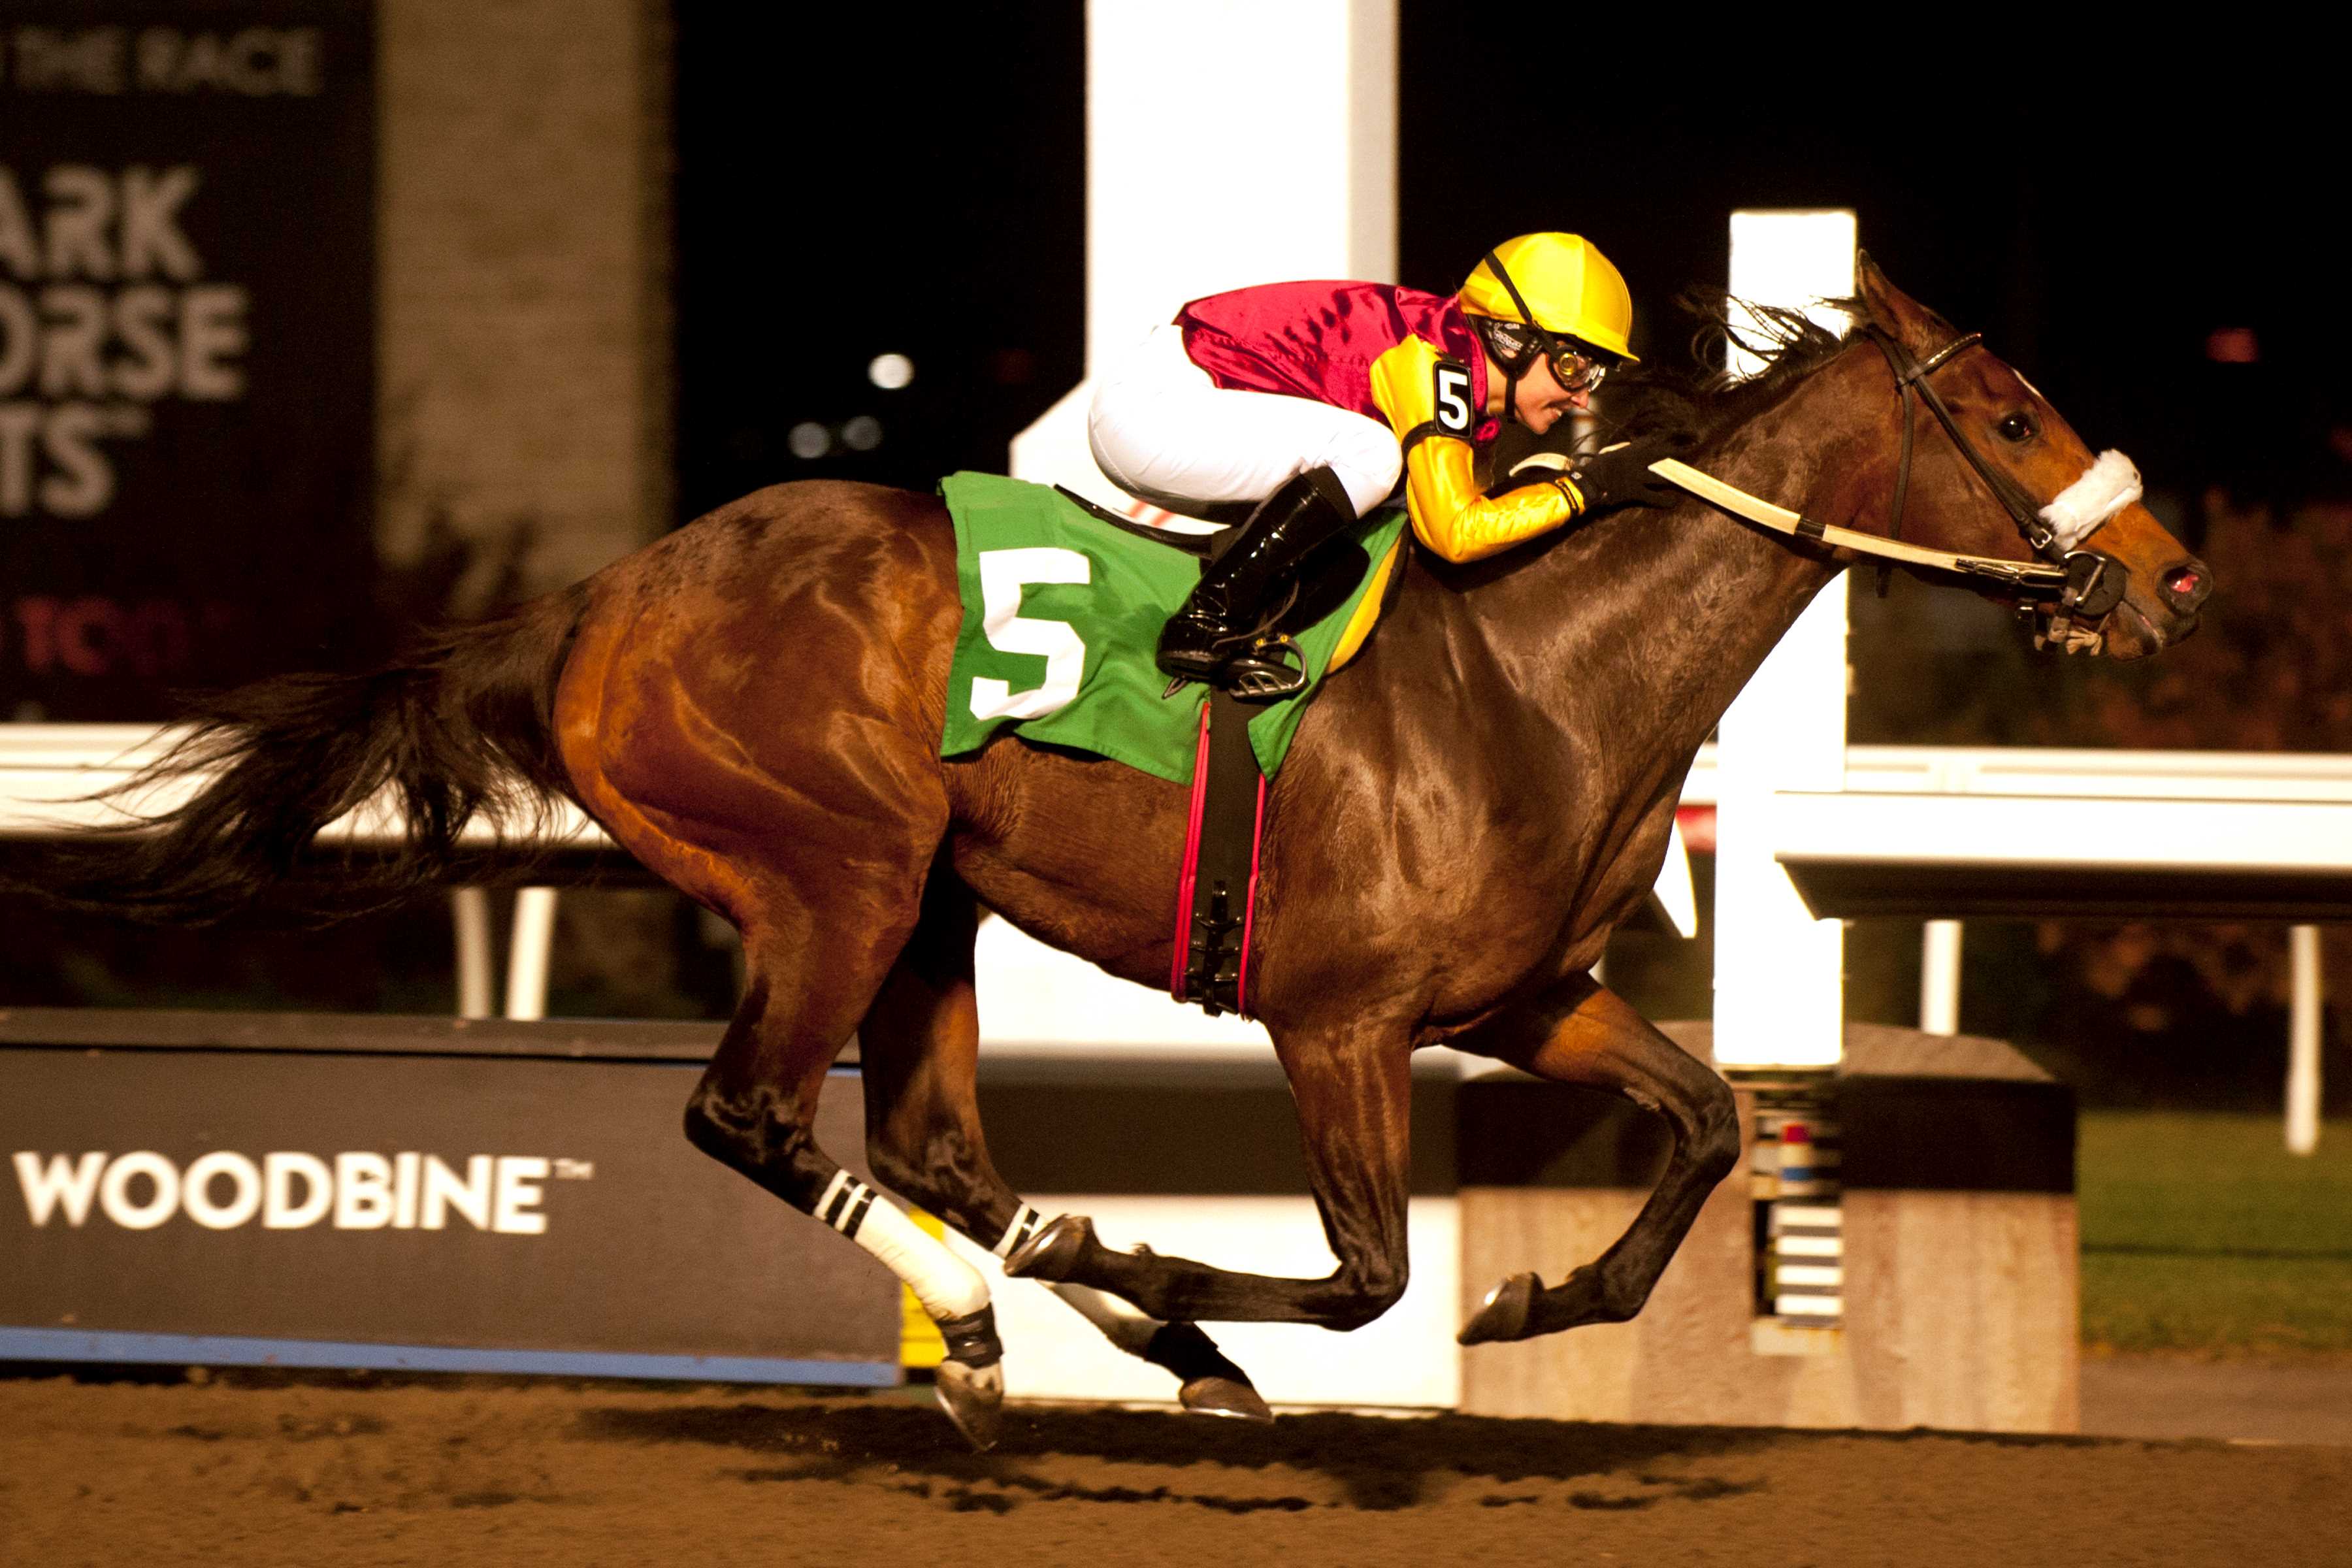 Sofia Vives winning her first race with Bodacious Miss in Race 7 on November 3, 2022 at Woodbine Racetrack (Michael Burns Photo)